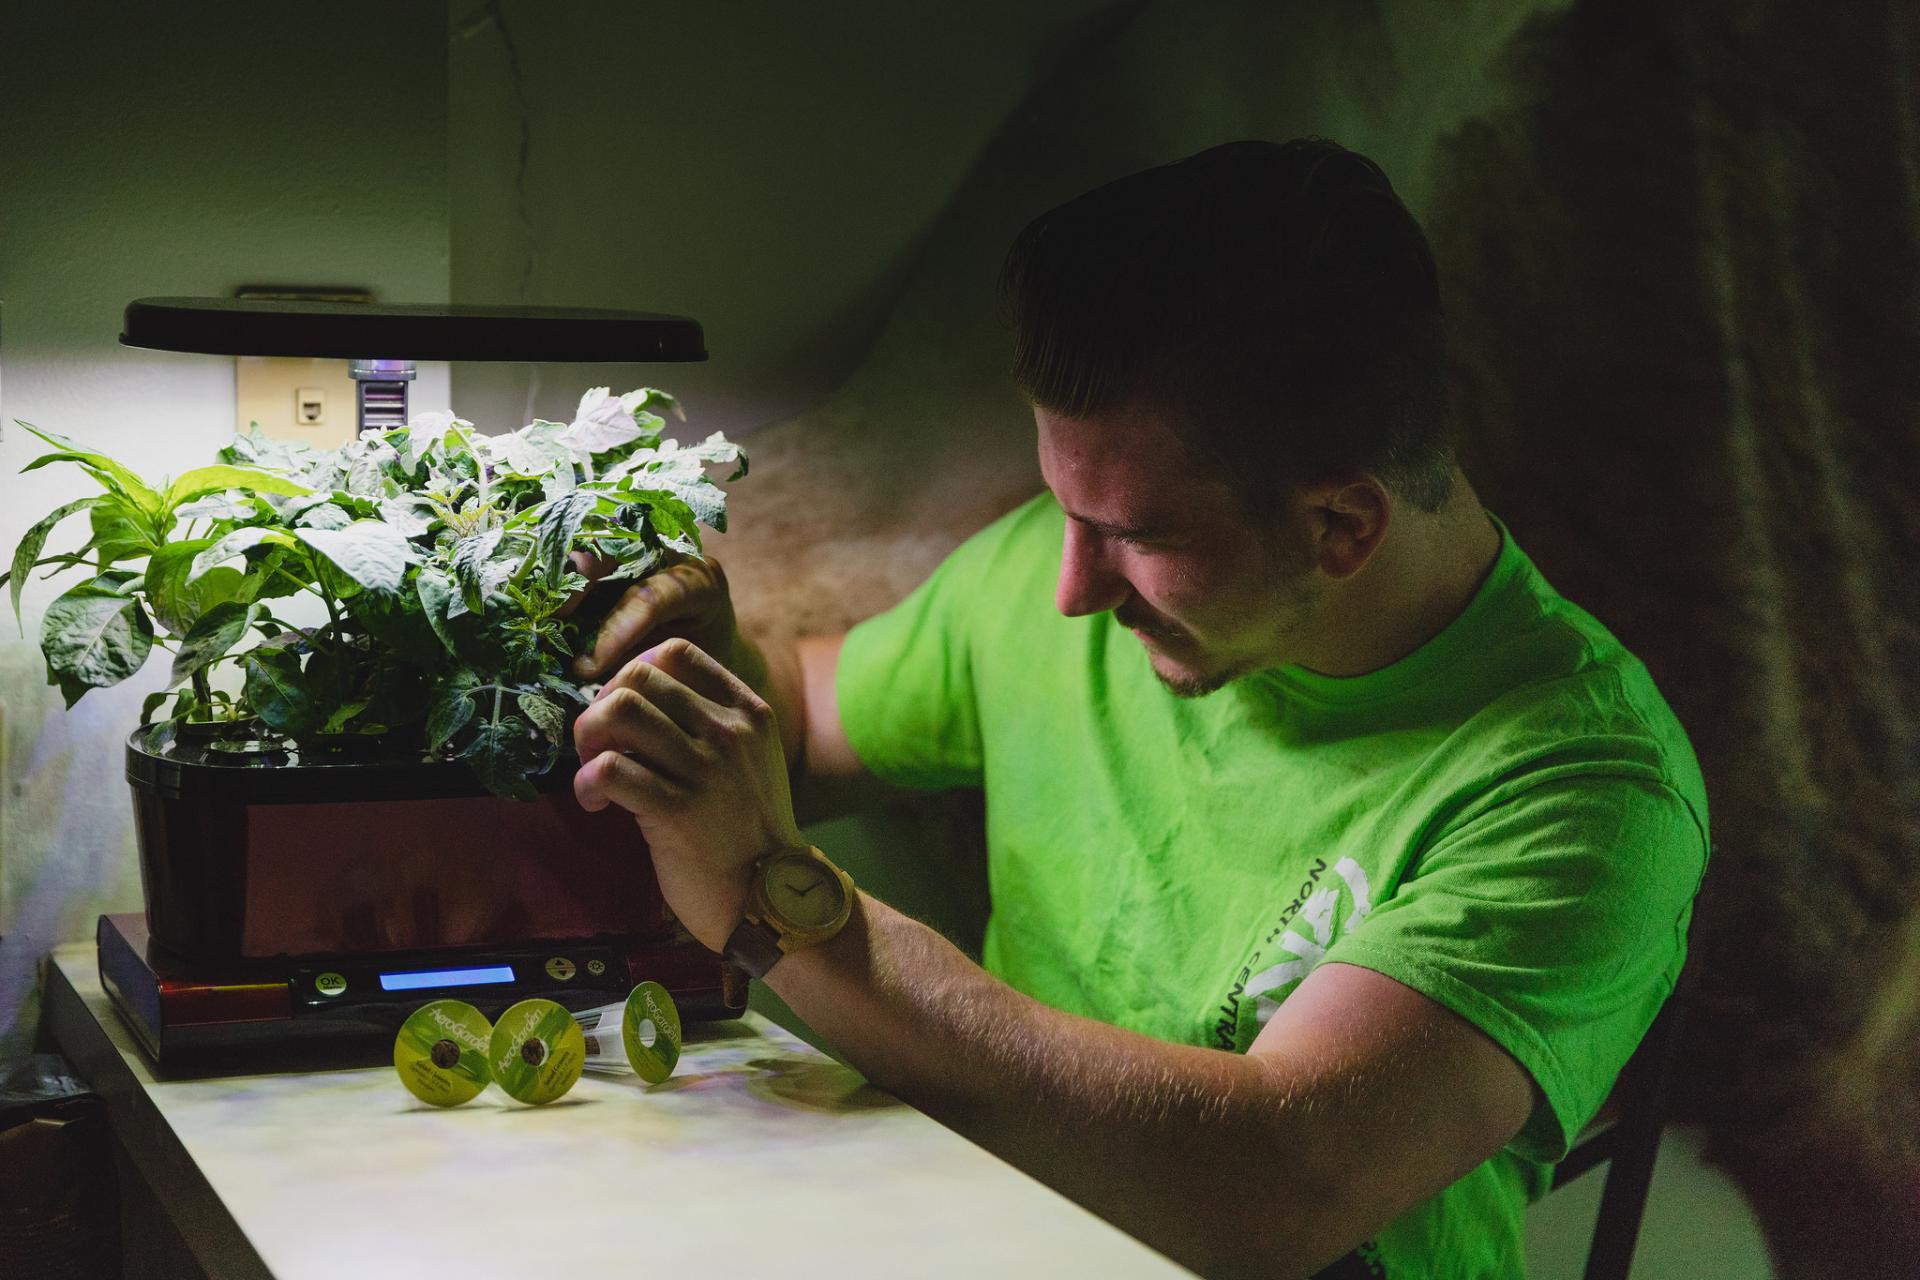 Brandon Malone works on the hydroponic unit in his home.